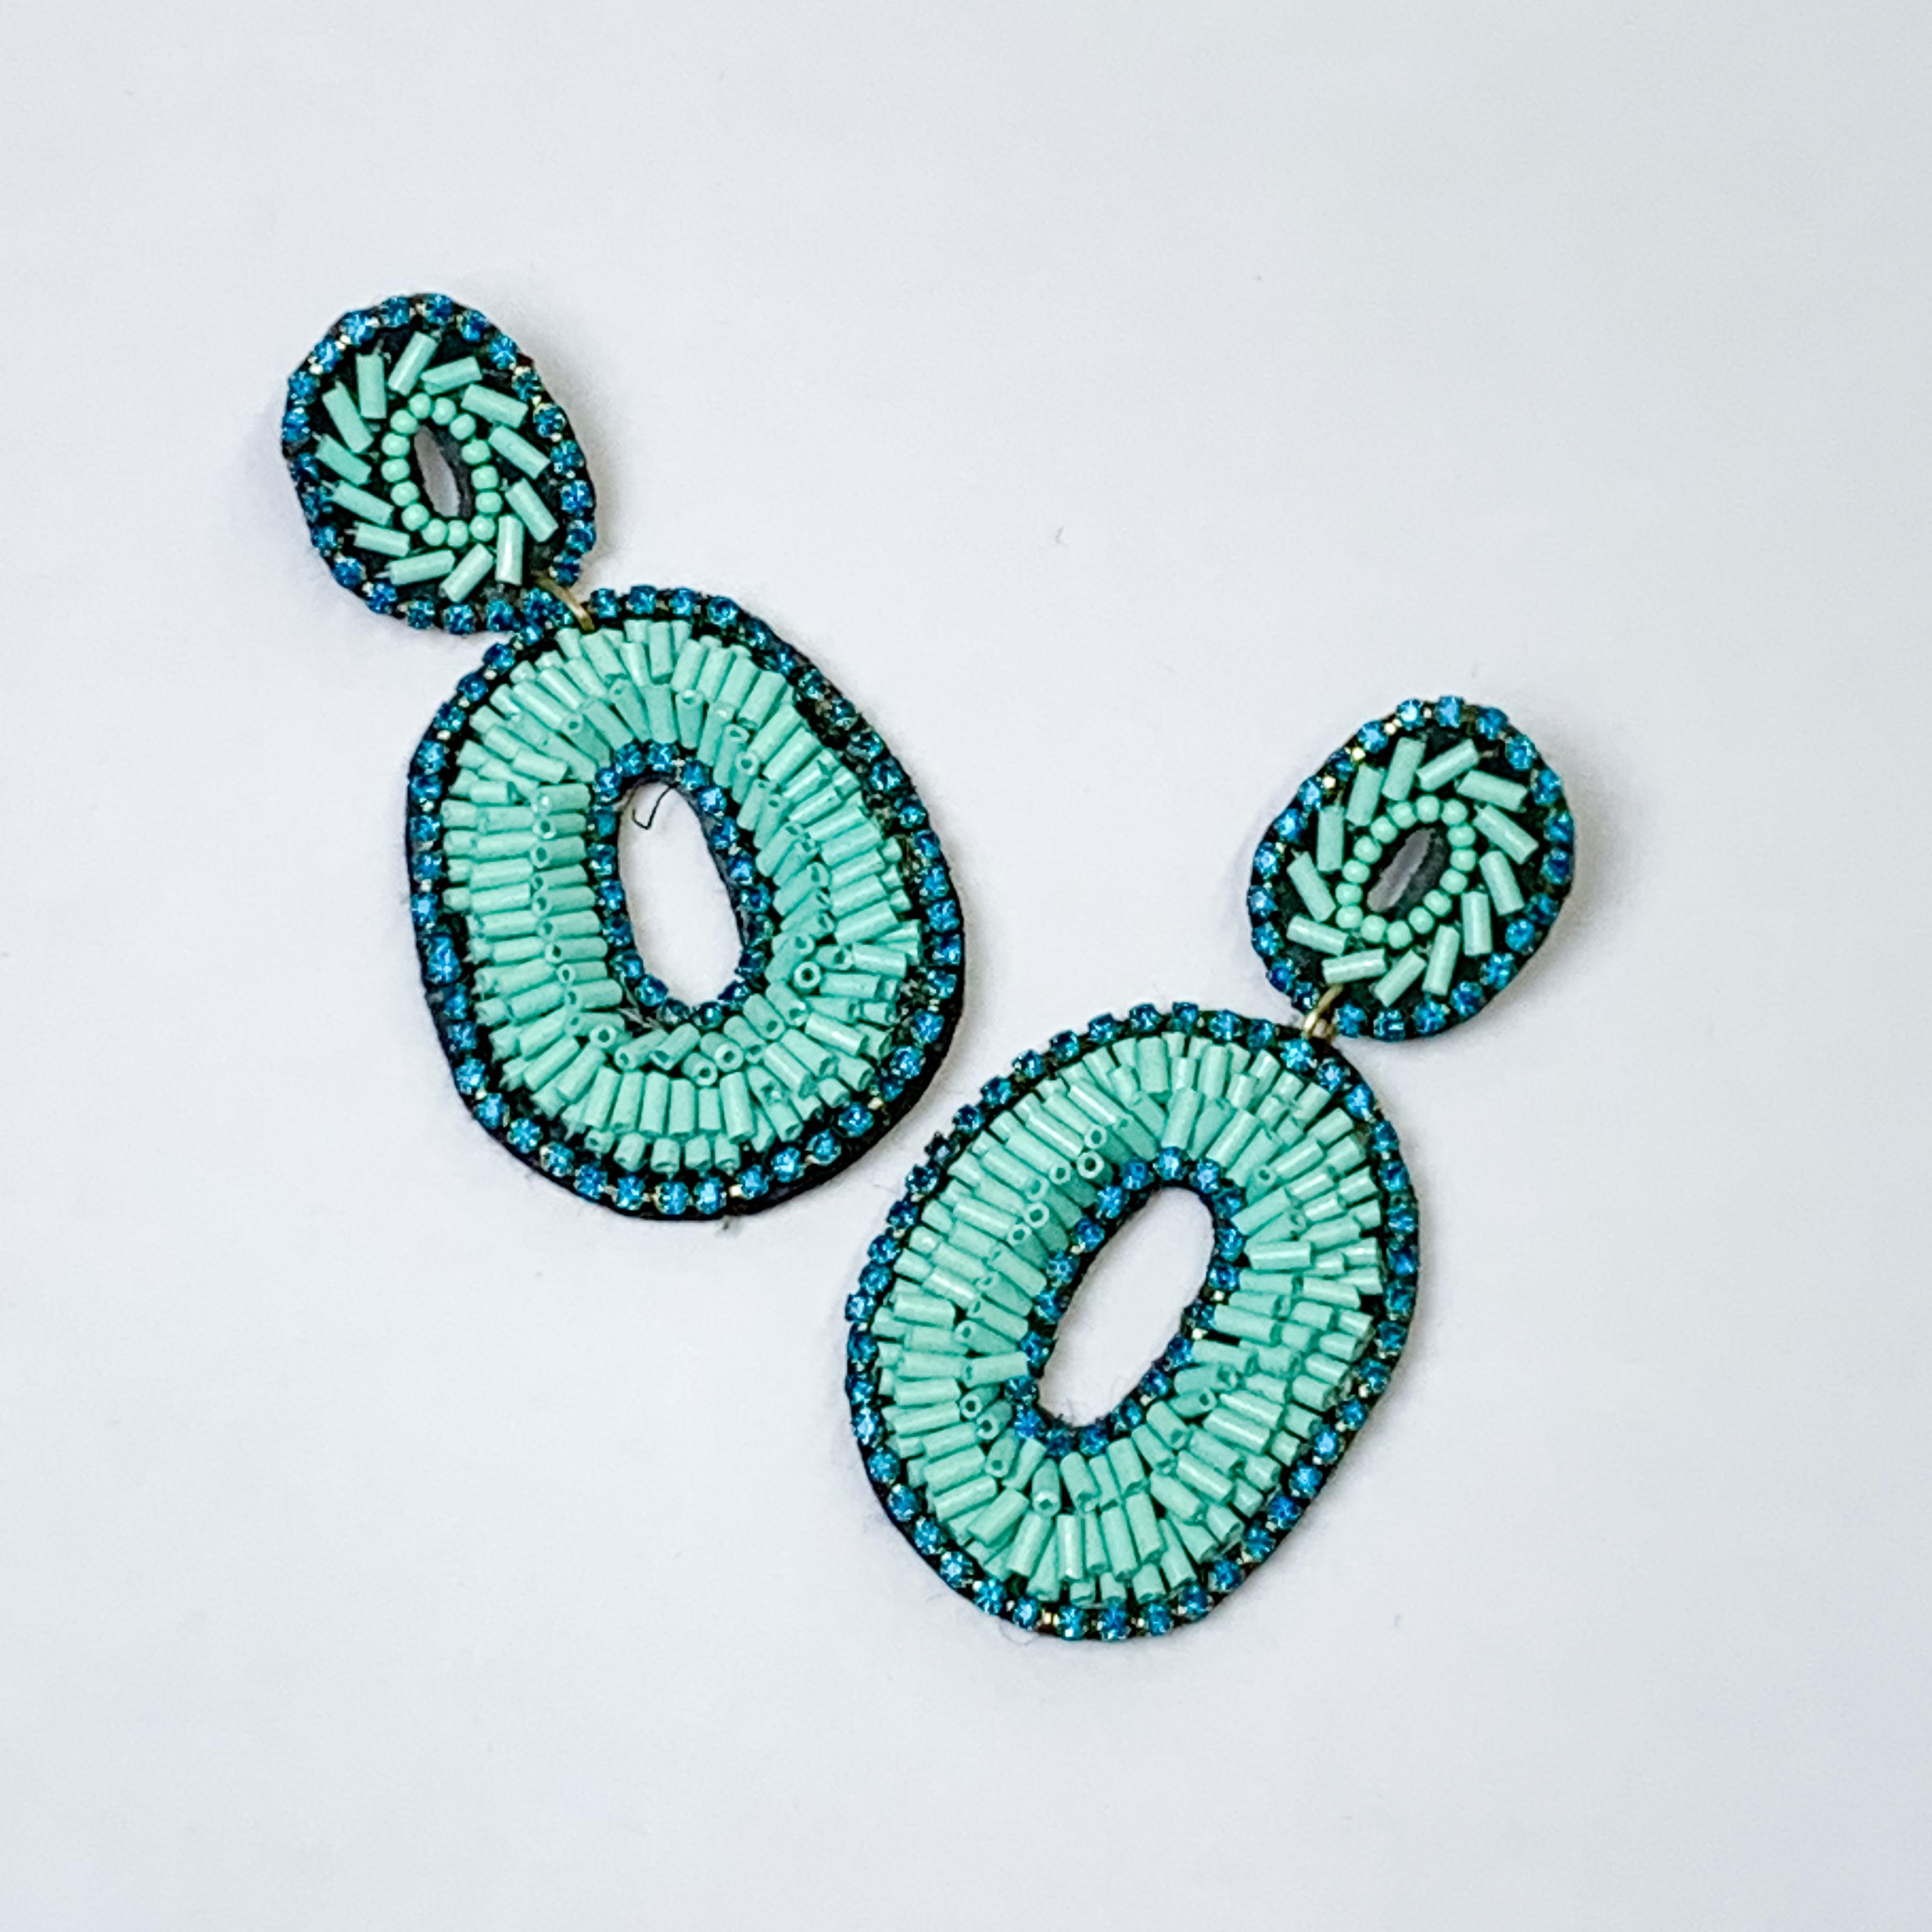 Bugle Bead Oval Earrings in Turquoise Blue - Giddy Up Glamour Boutique